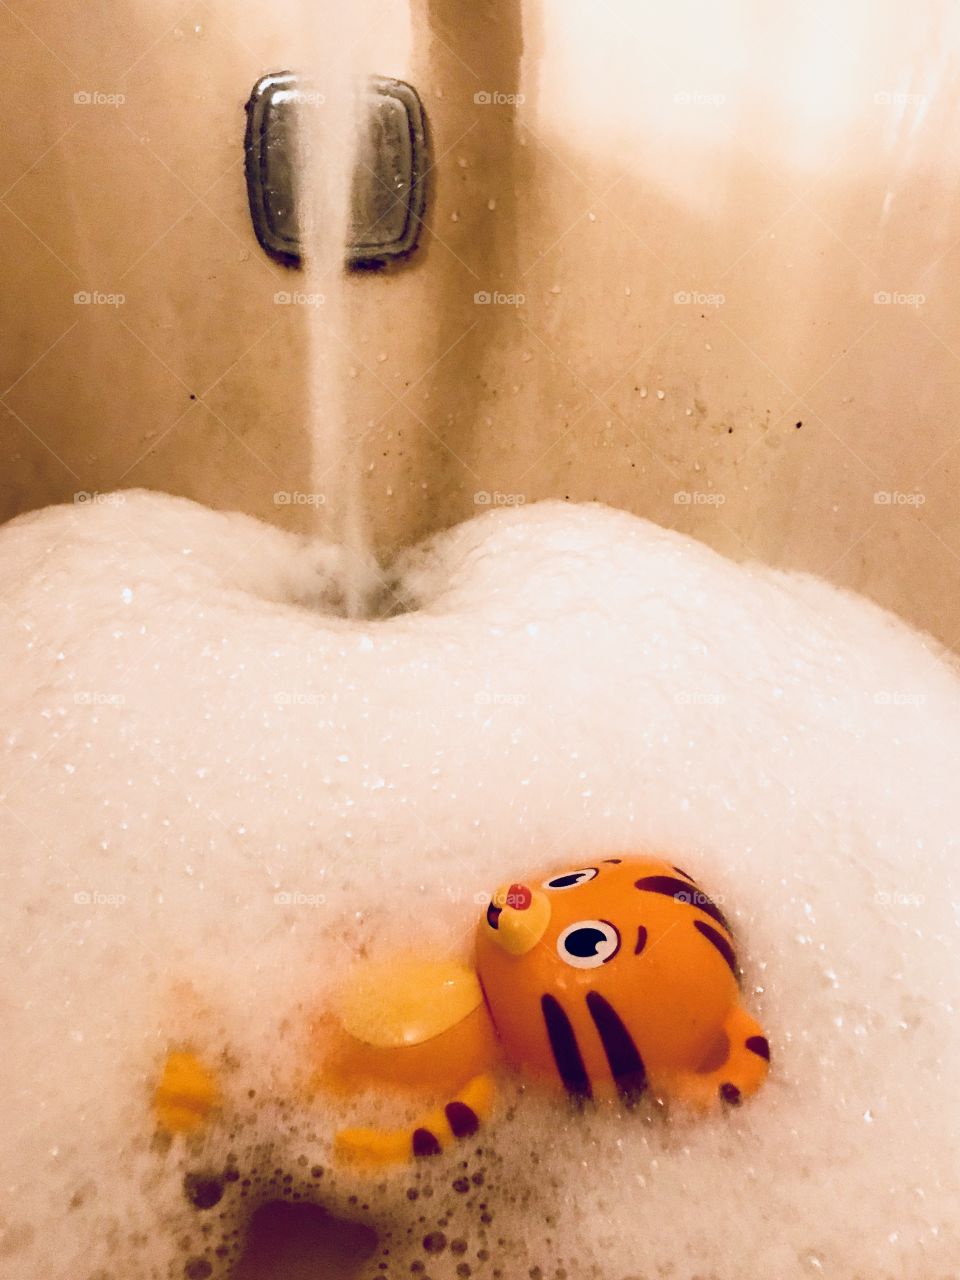 Daniel tiger toy floating in the bathtub filled with bubbles while the water is flowing from the faucet filling the tub